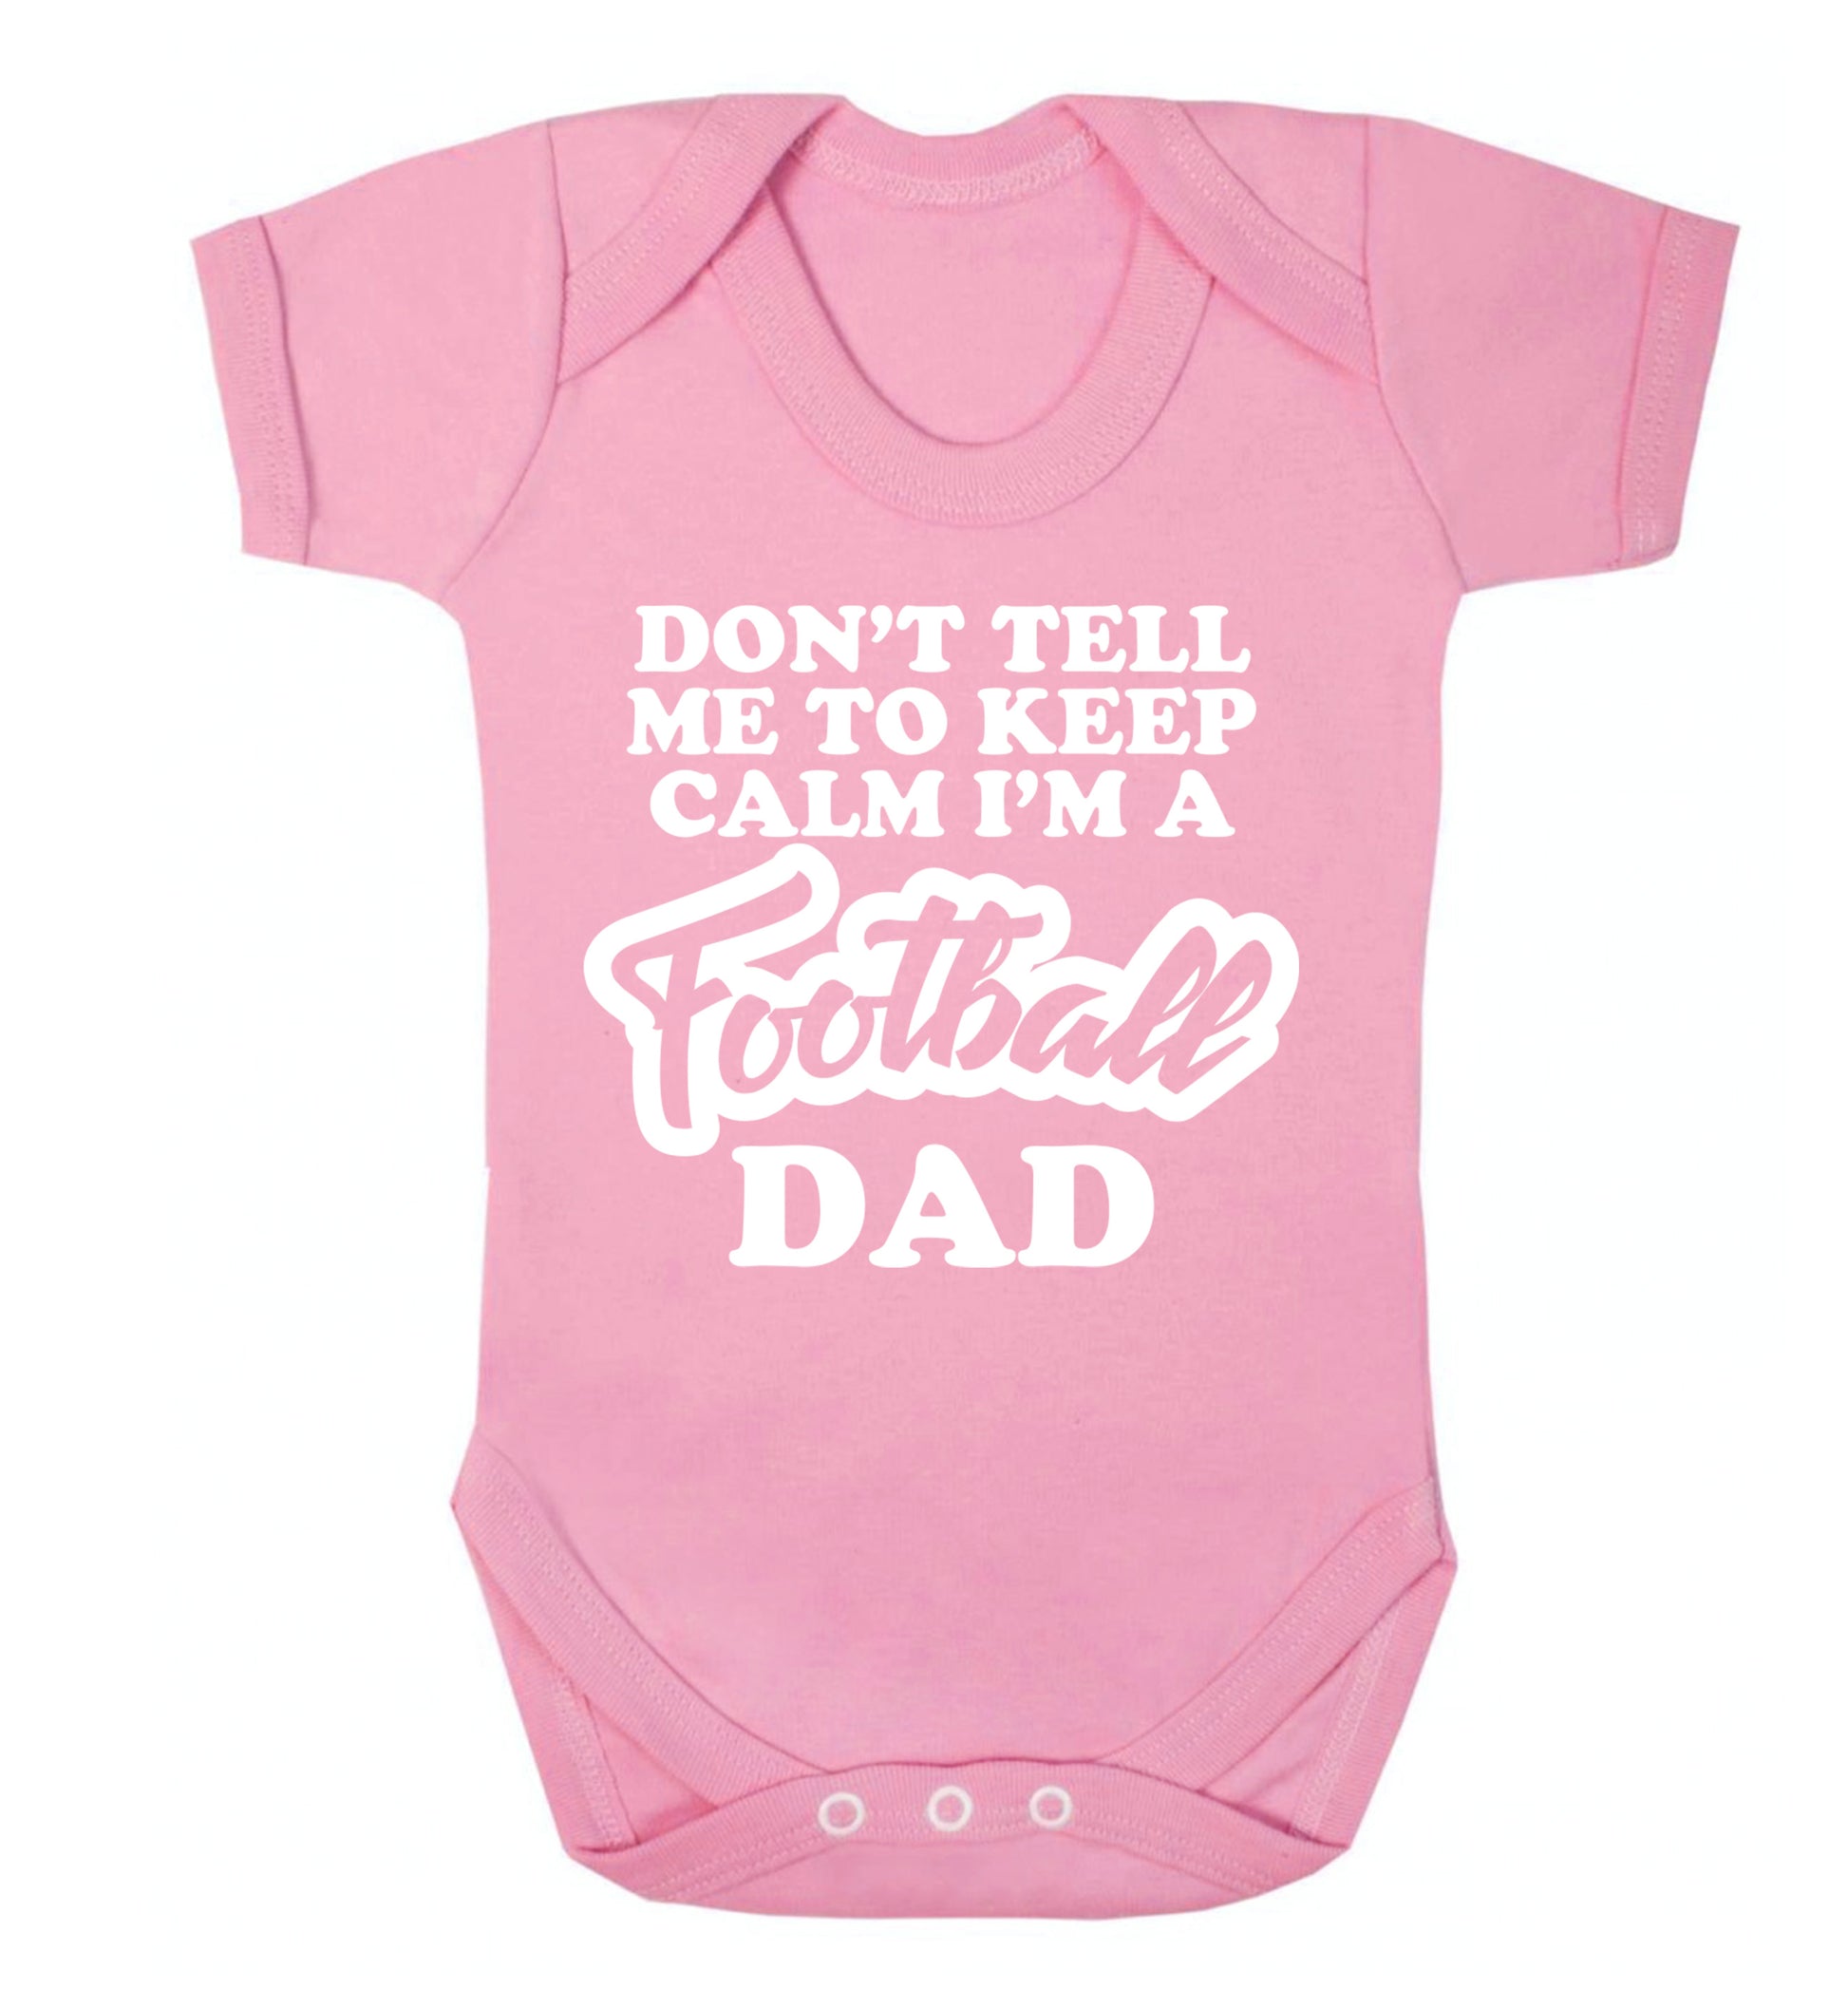 Don't tell me to keep calm I'm a football grandad Baby Vest pale pink 18-24 months